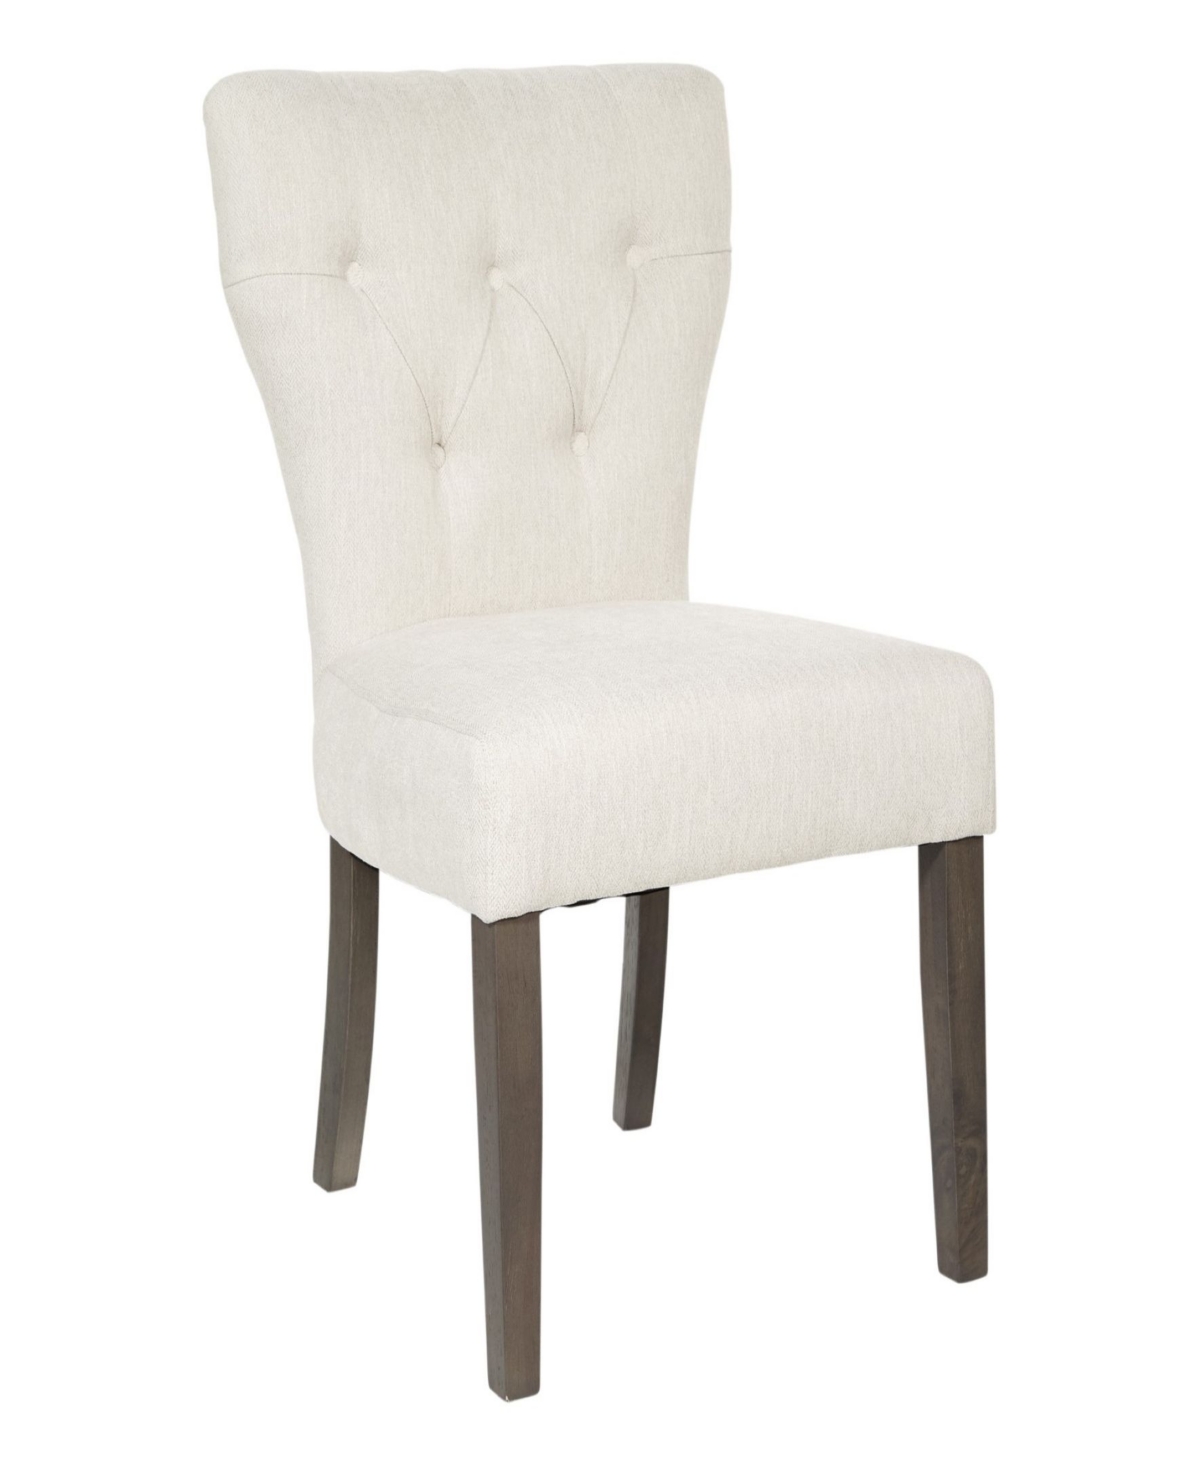 Osp Home Furnishings Andrew Dining Chair In Cream